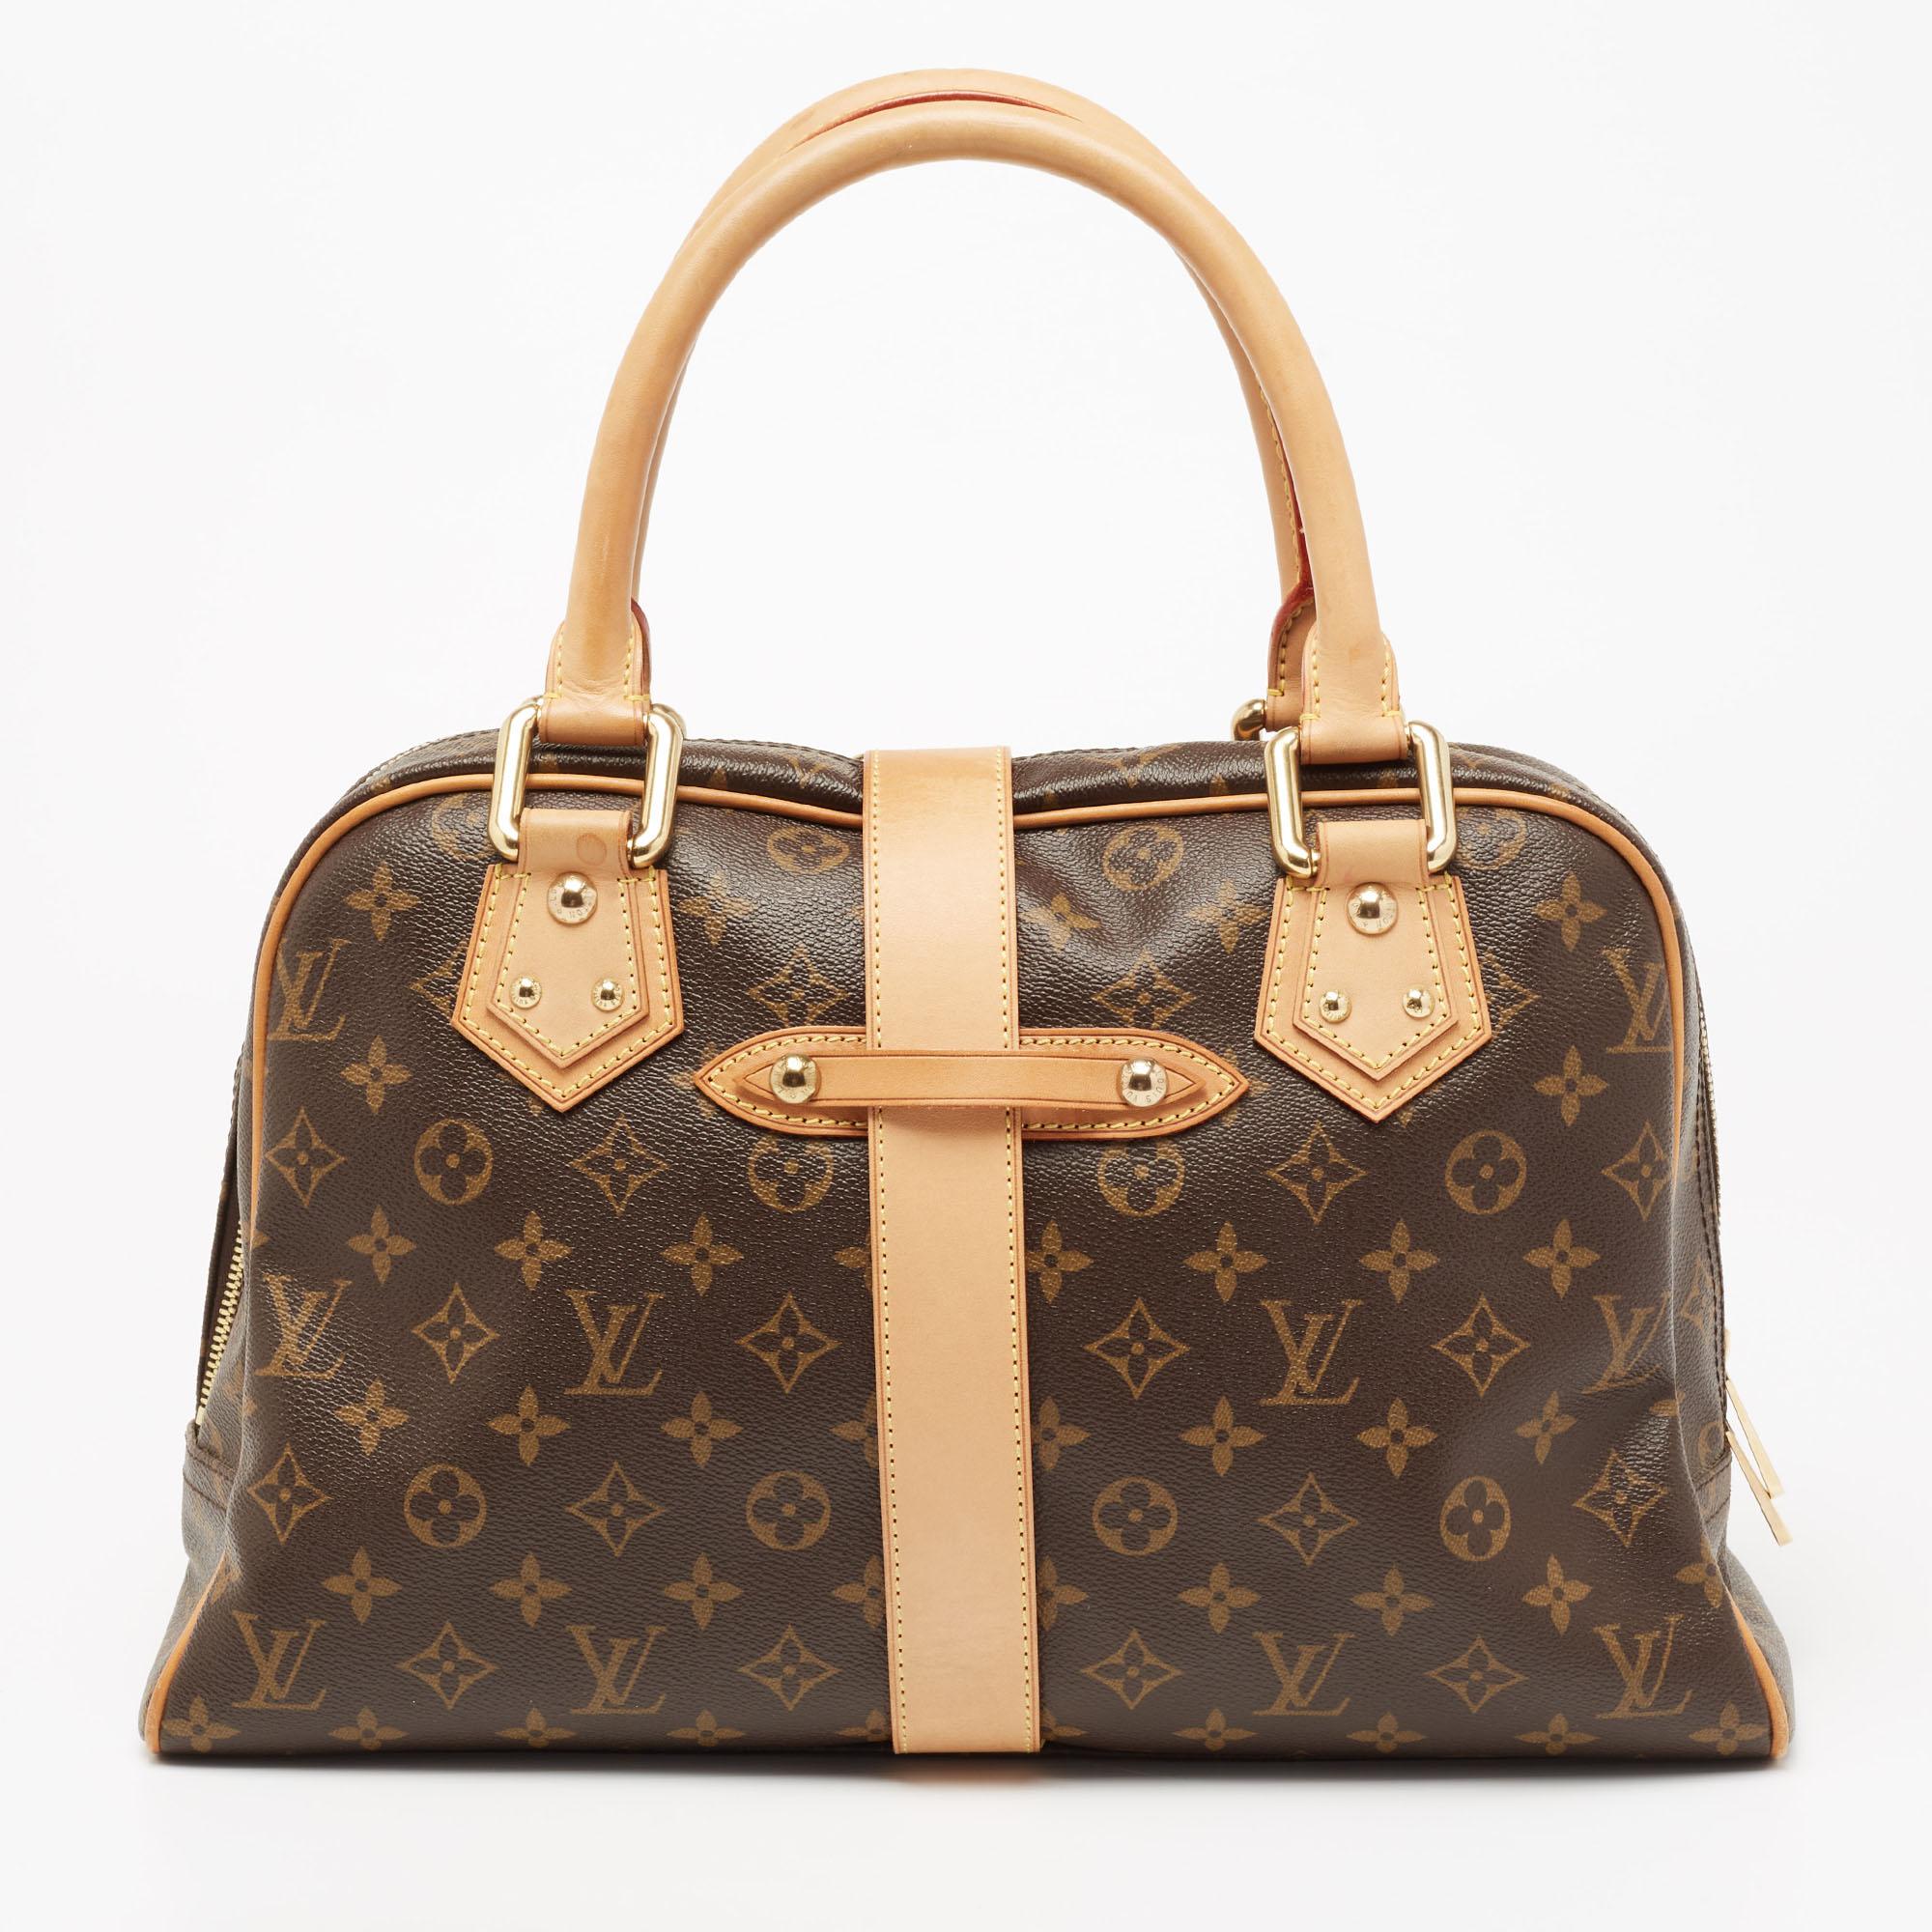 Own this gorgeous Manhattan GM Bag by Louis Vuitton today and flaunt it wherever you go. The bag has been crafted from signature Monogram canvas and lined with Alcantara. It is equipped with two push-lock pockets on the front, a main zip-enclosed